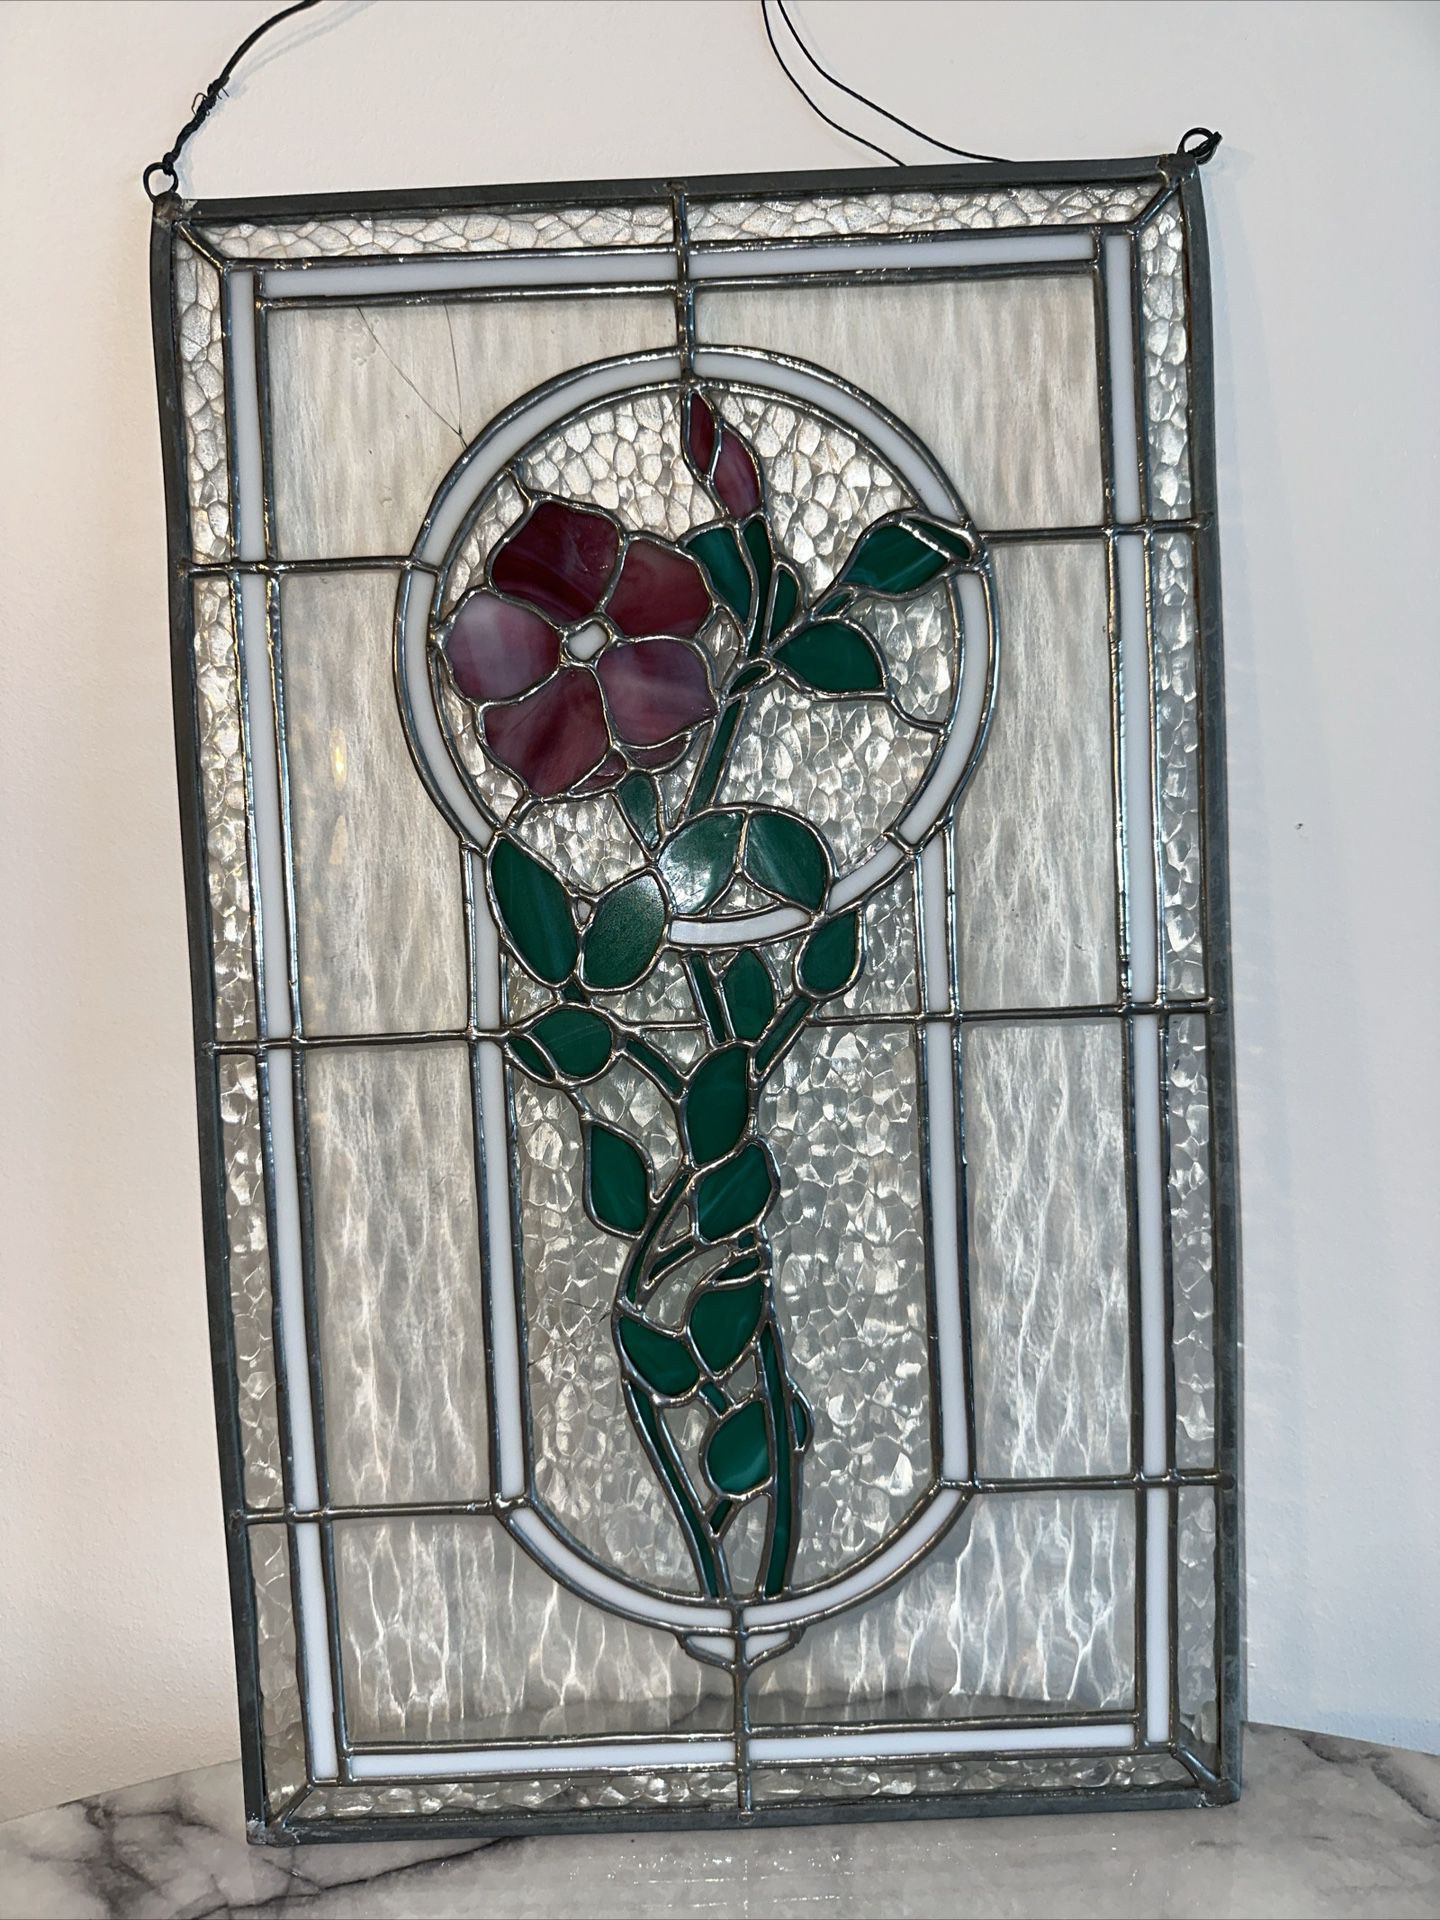  Vintage Leaded Stained Glass Hanging Window Panel 20x12" Flower Handmade Pink